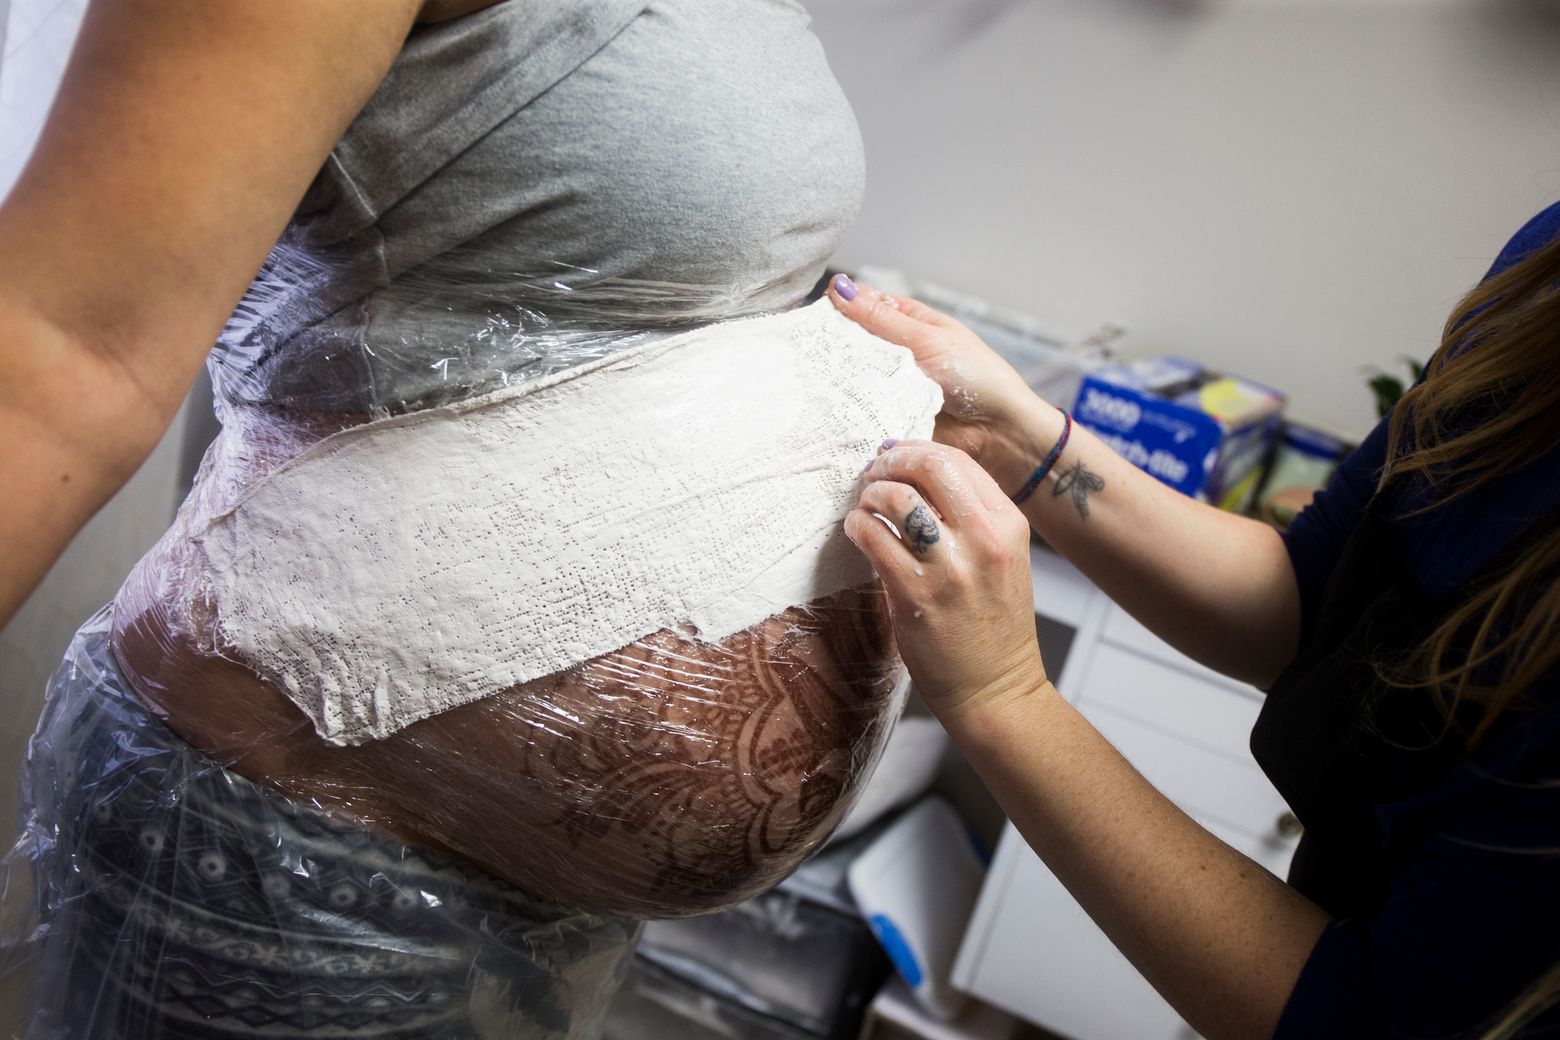 Belly casting offers expecting mothers 'more than a picture